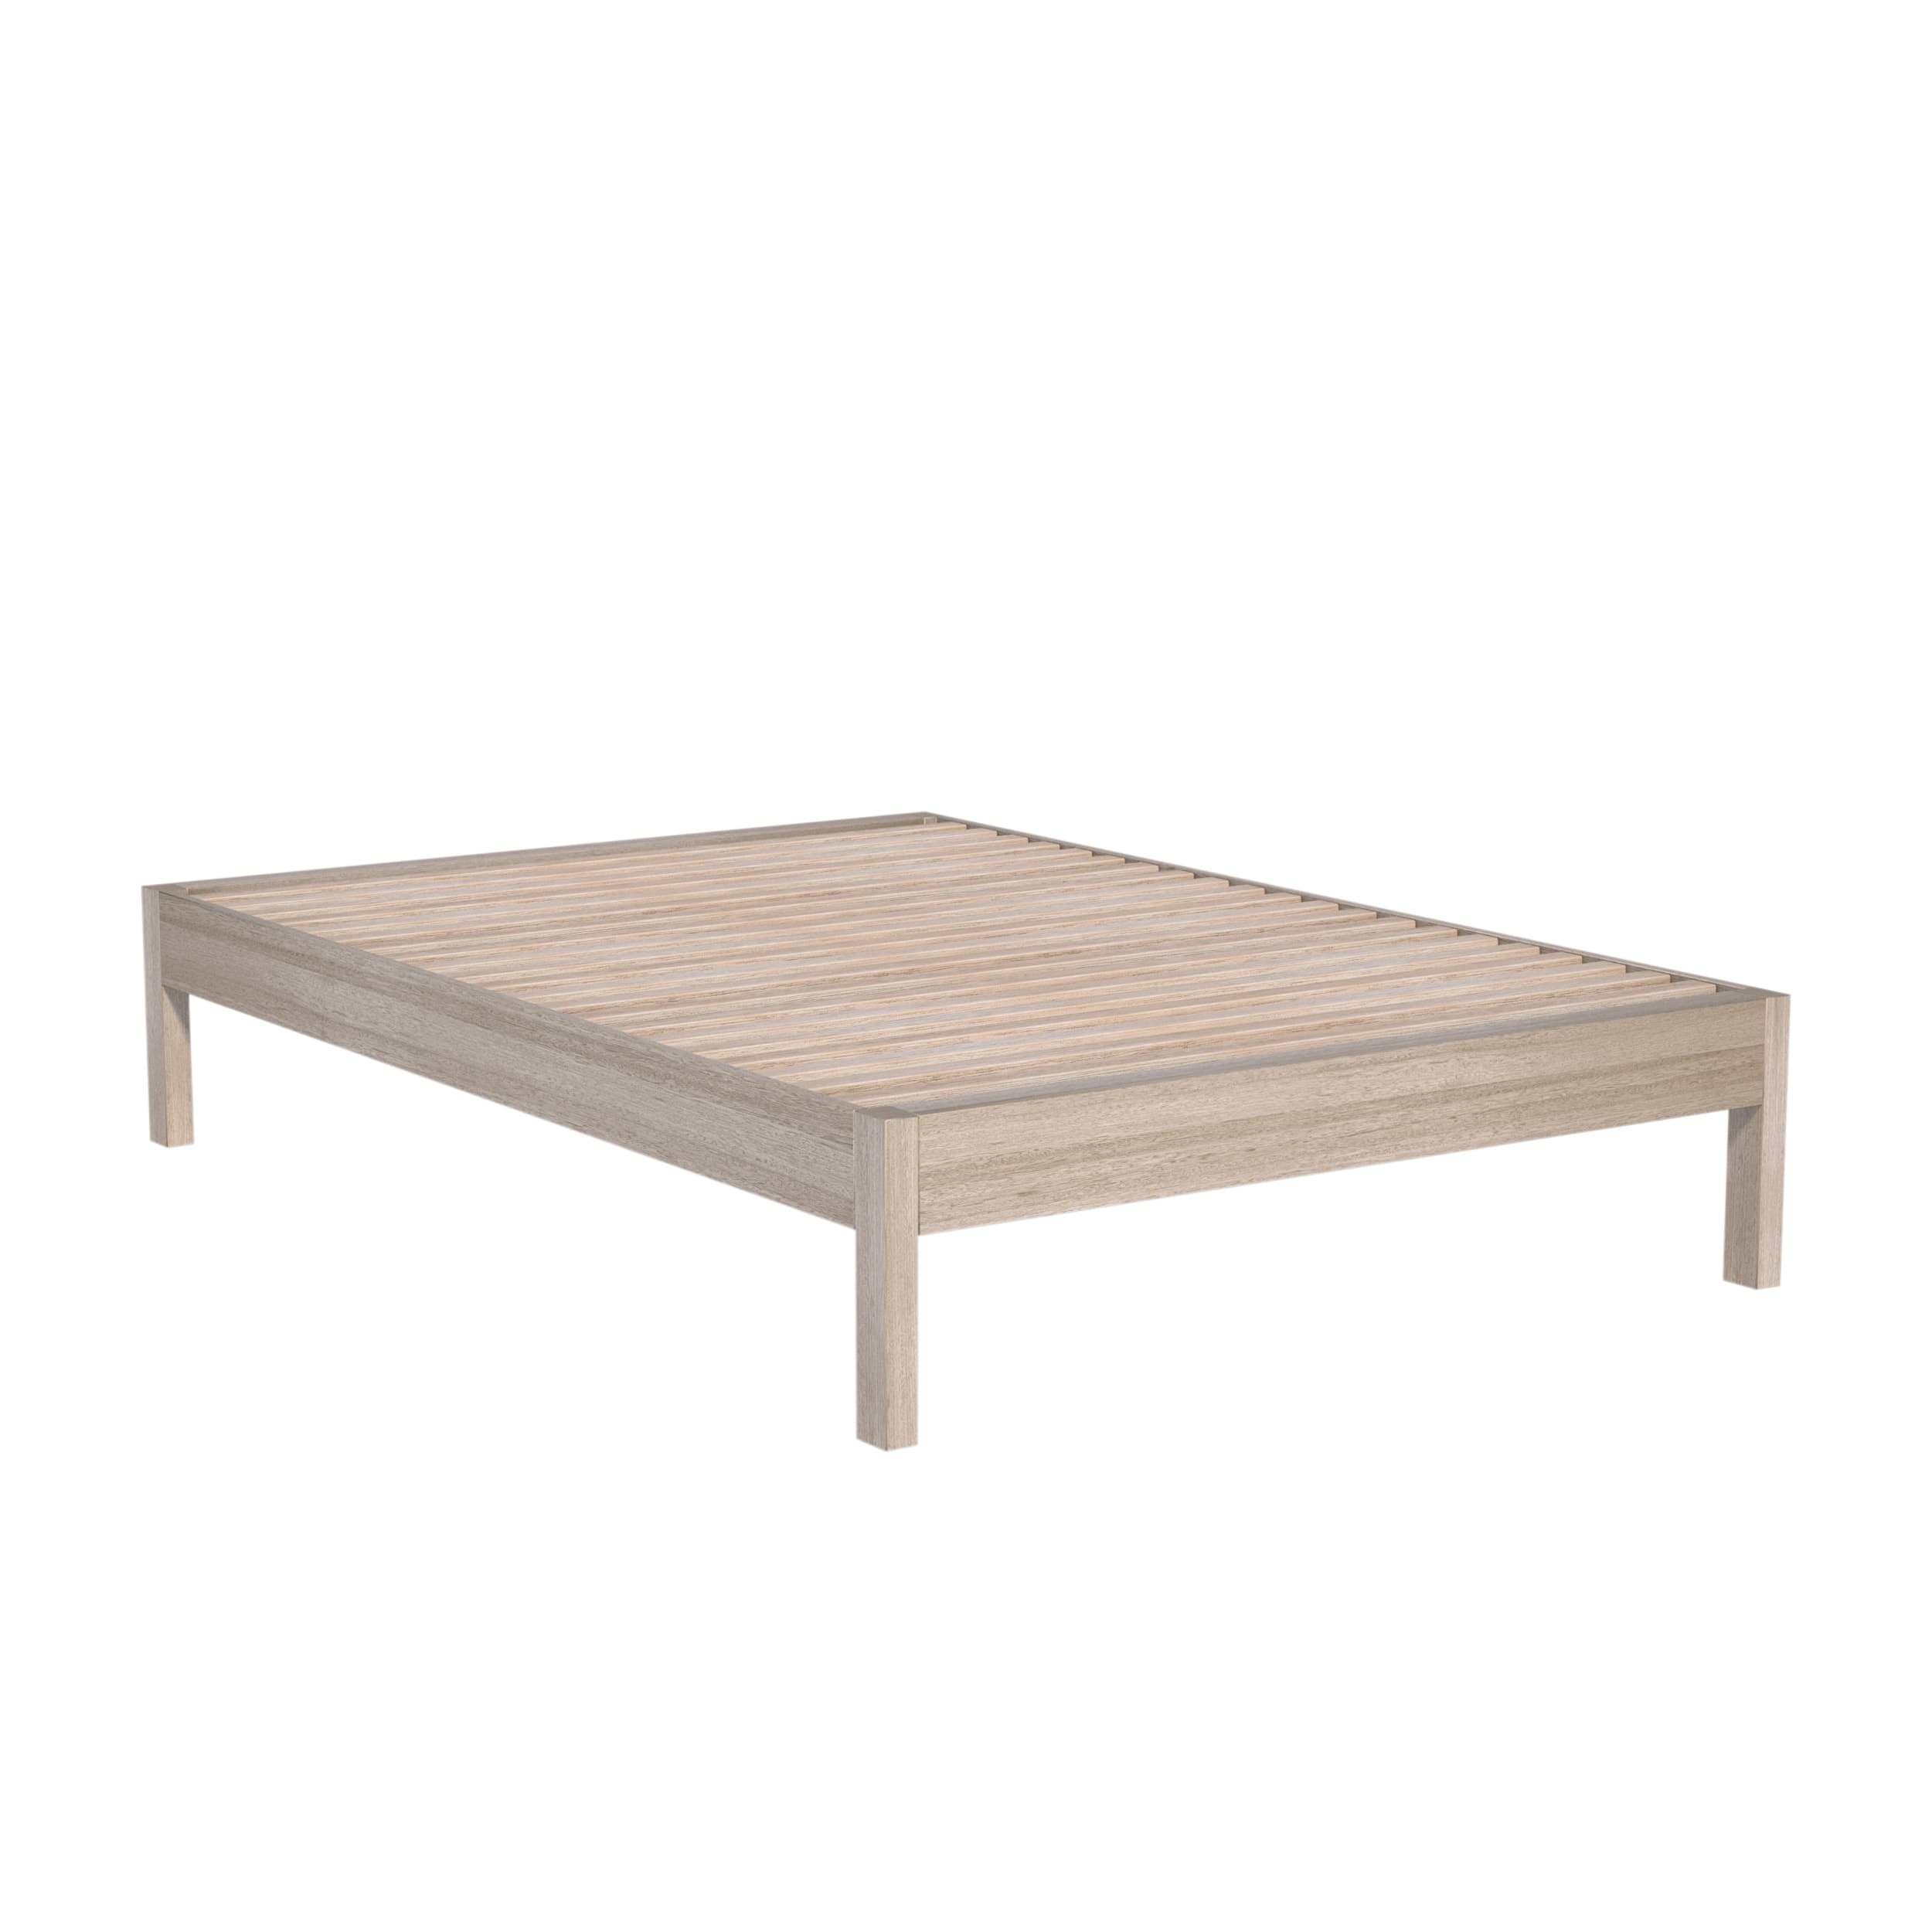 Cassia Timber Bed Frame